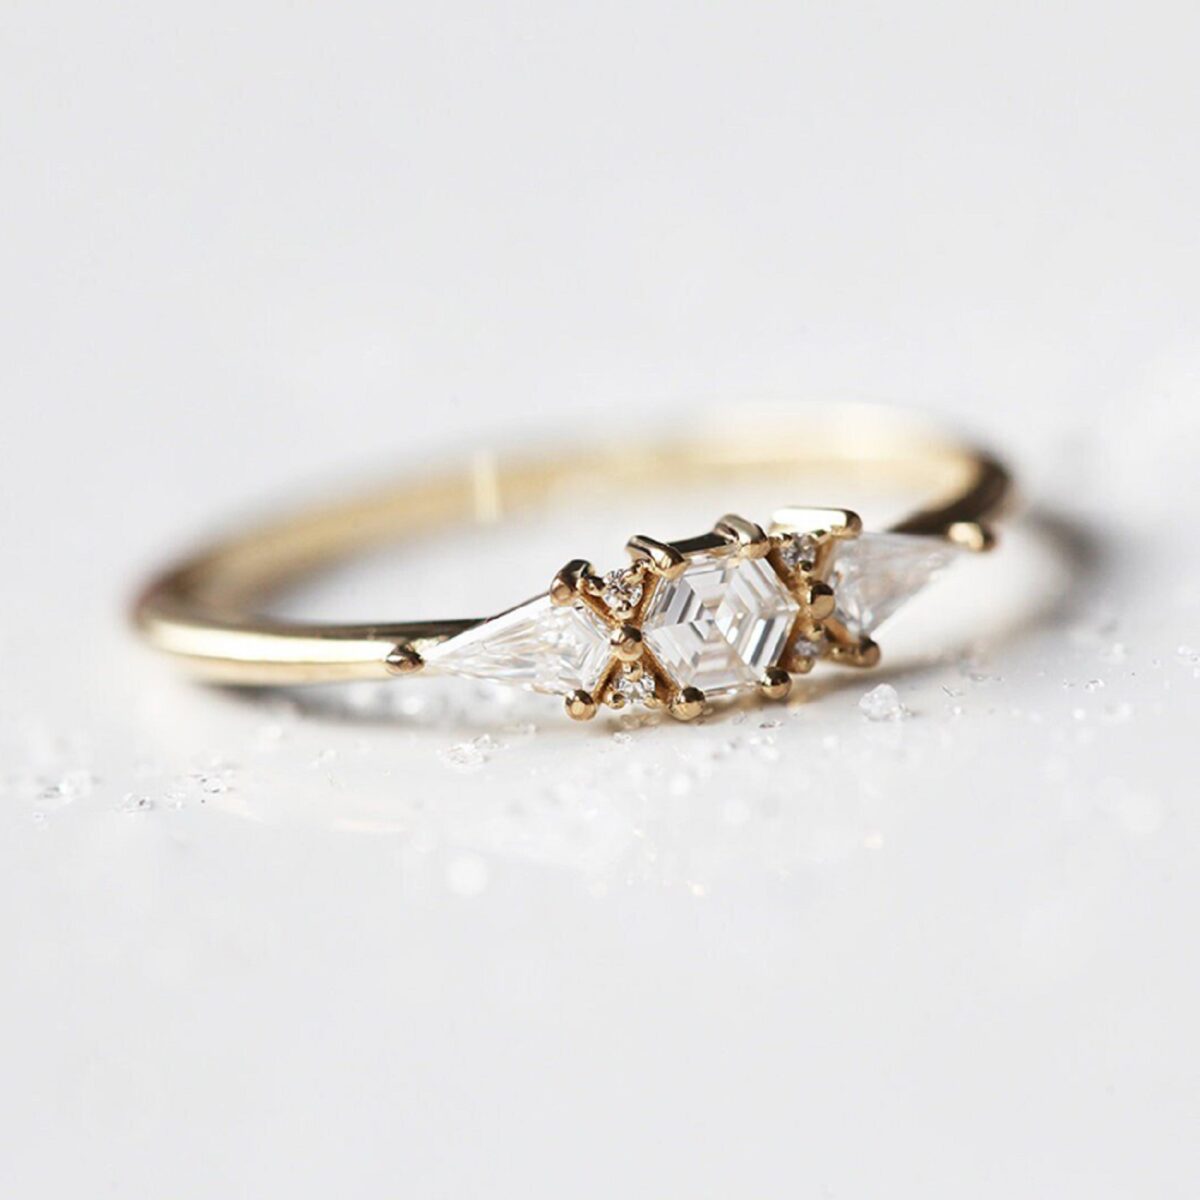 Stylist yet vintage hexagon lab grown diamond ring with accent kite cut diamond three stone ring crafted in 14k yellow gold.